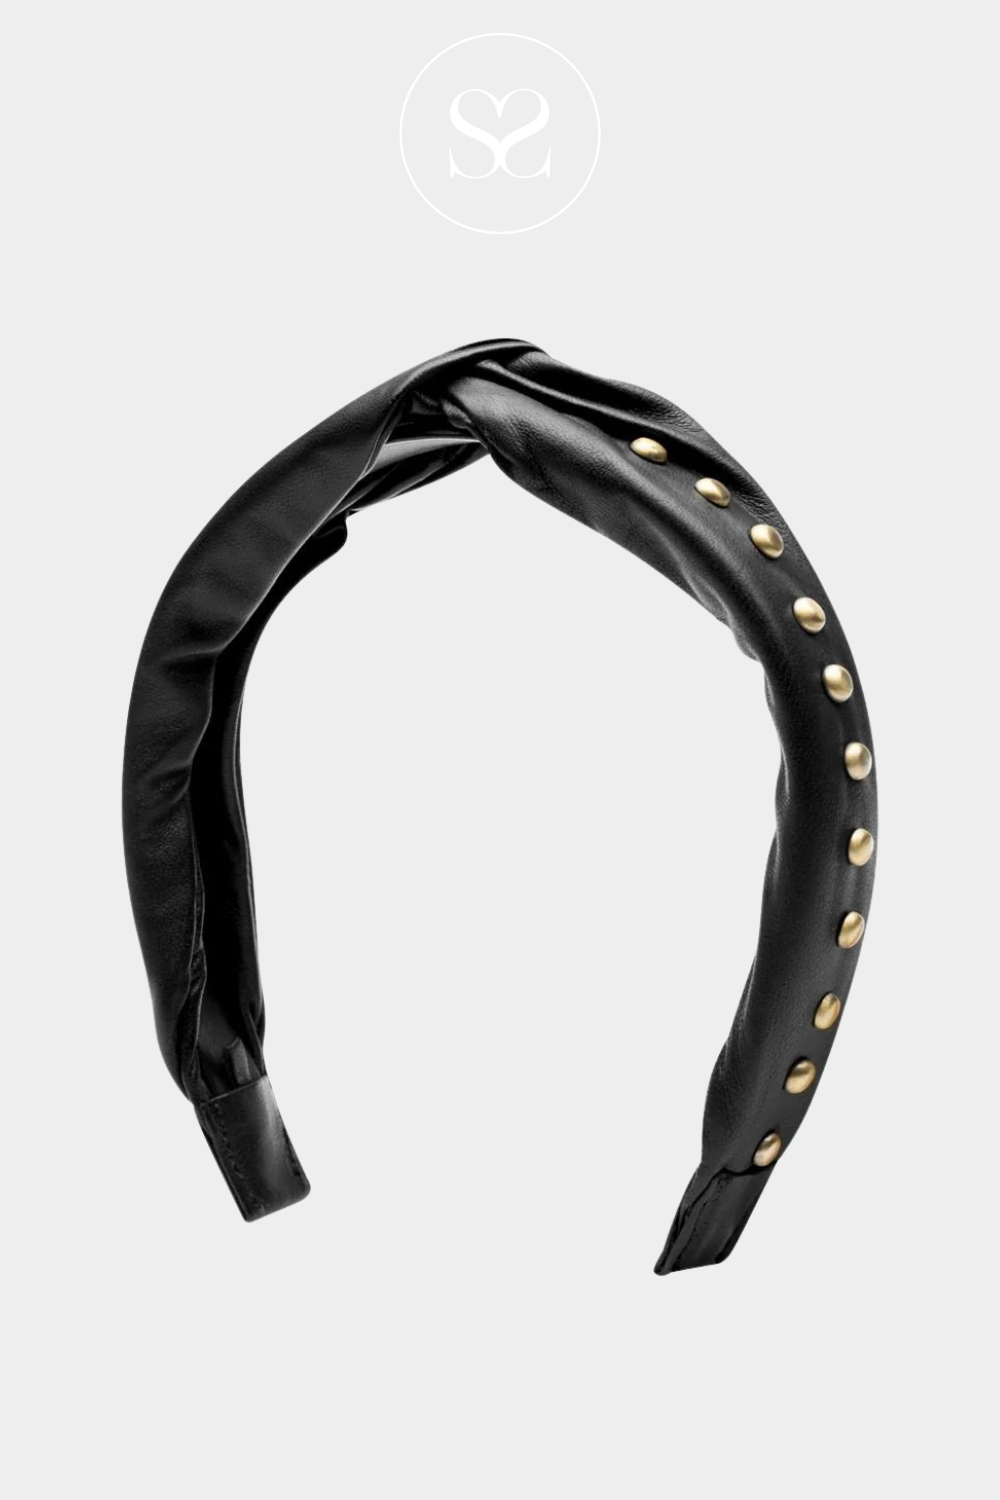 DEPECHE BLACK LEATHER HAIRBAND ITH GOLD STUDS